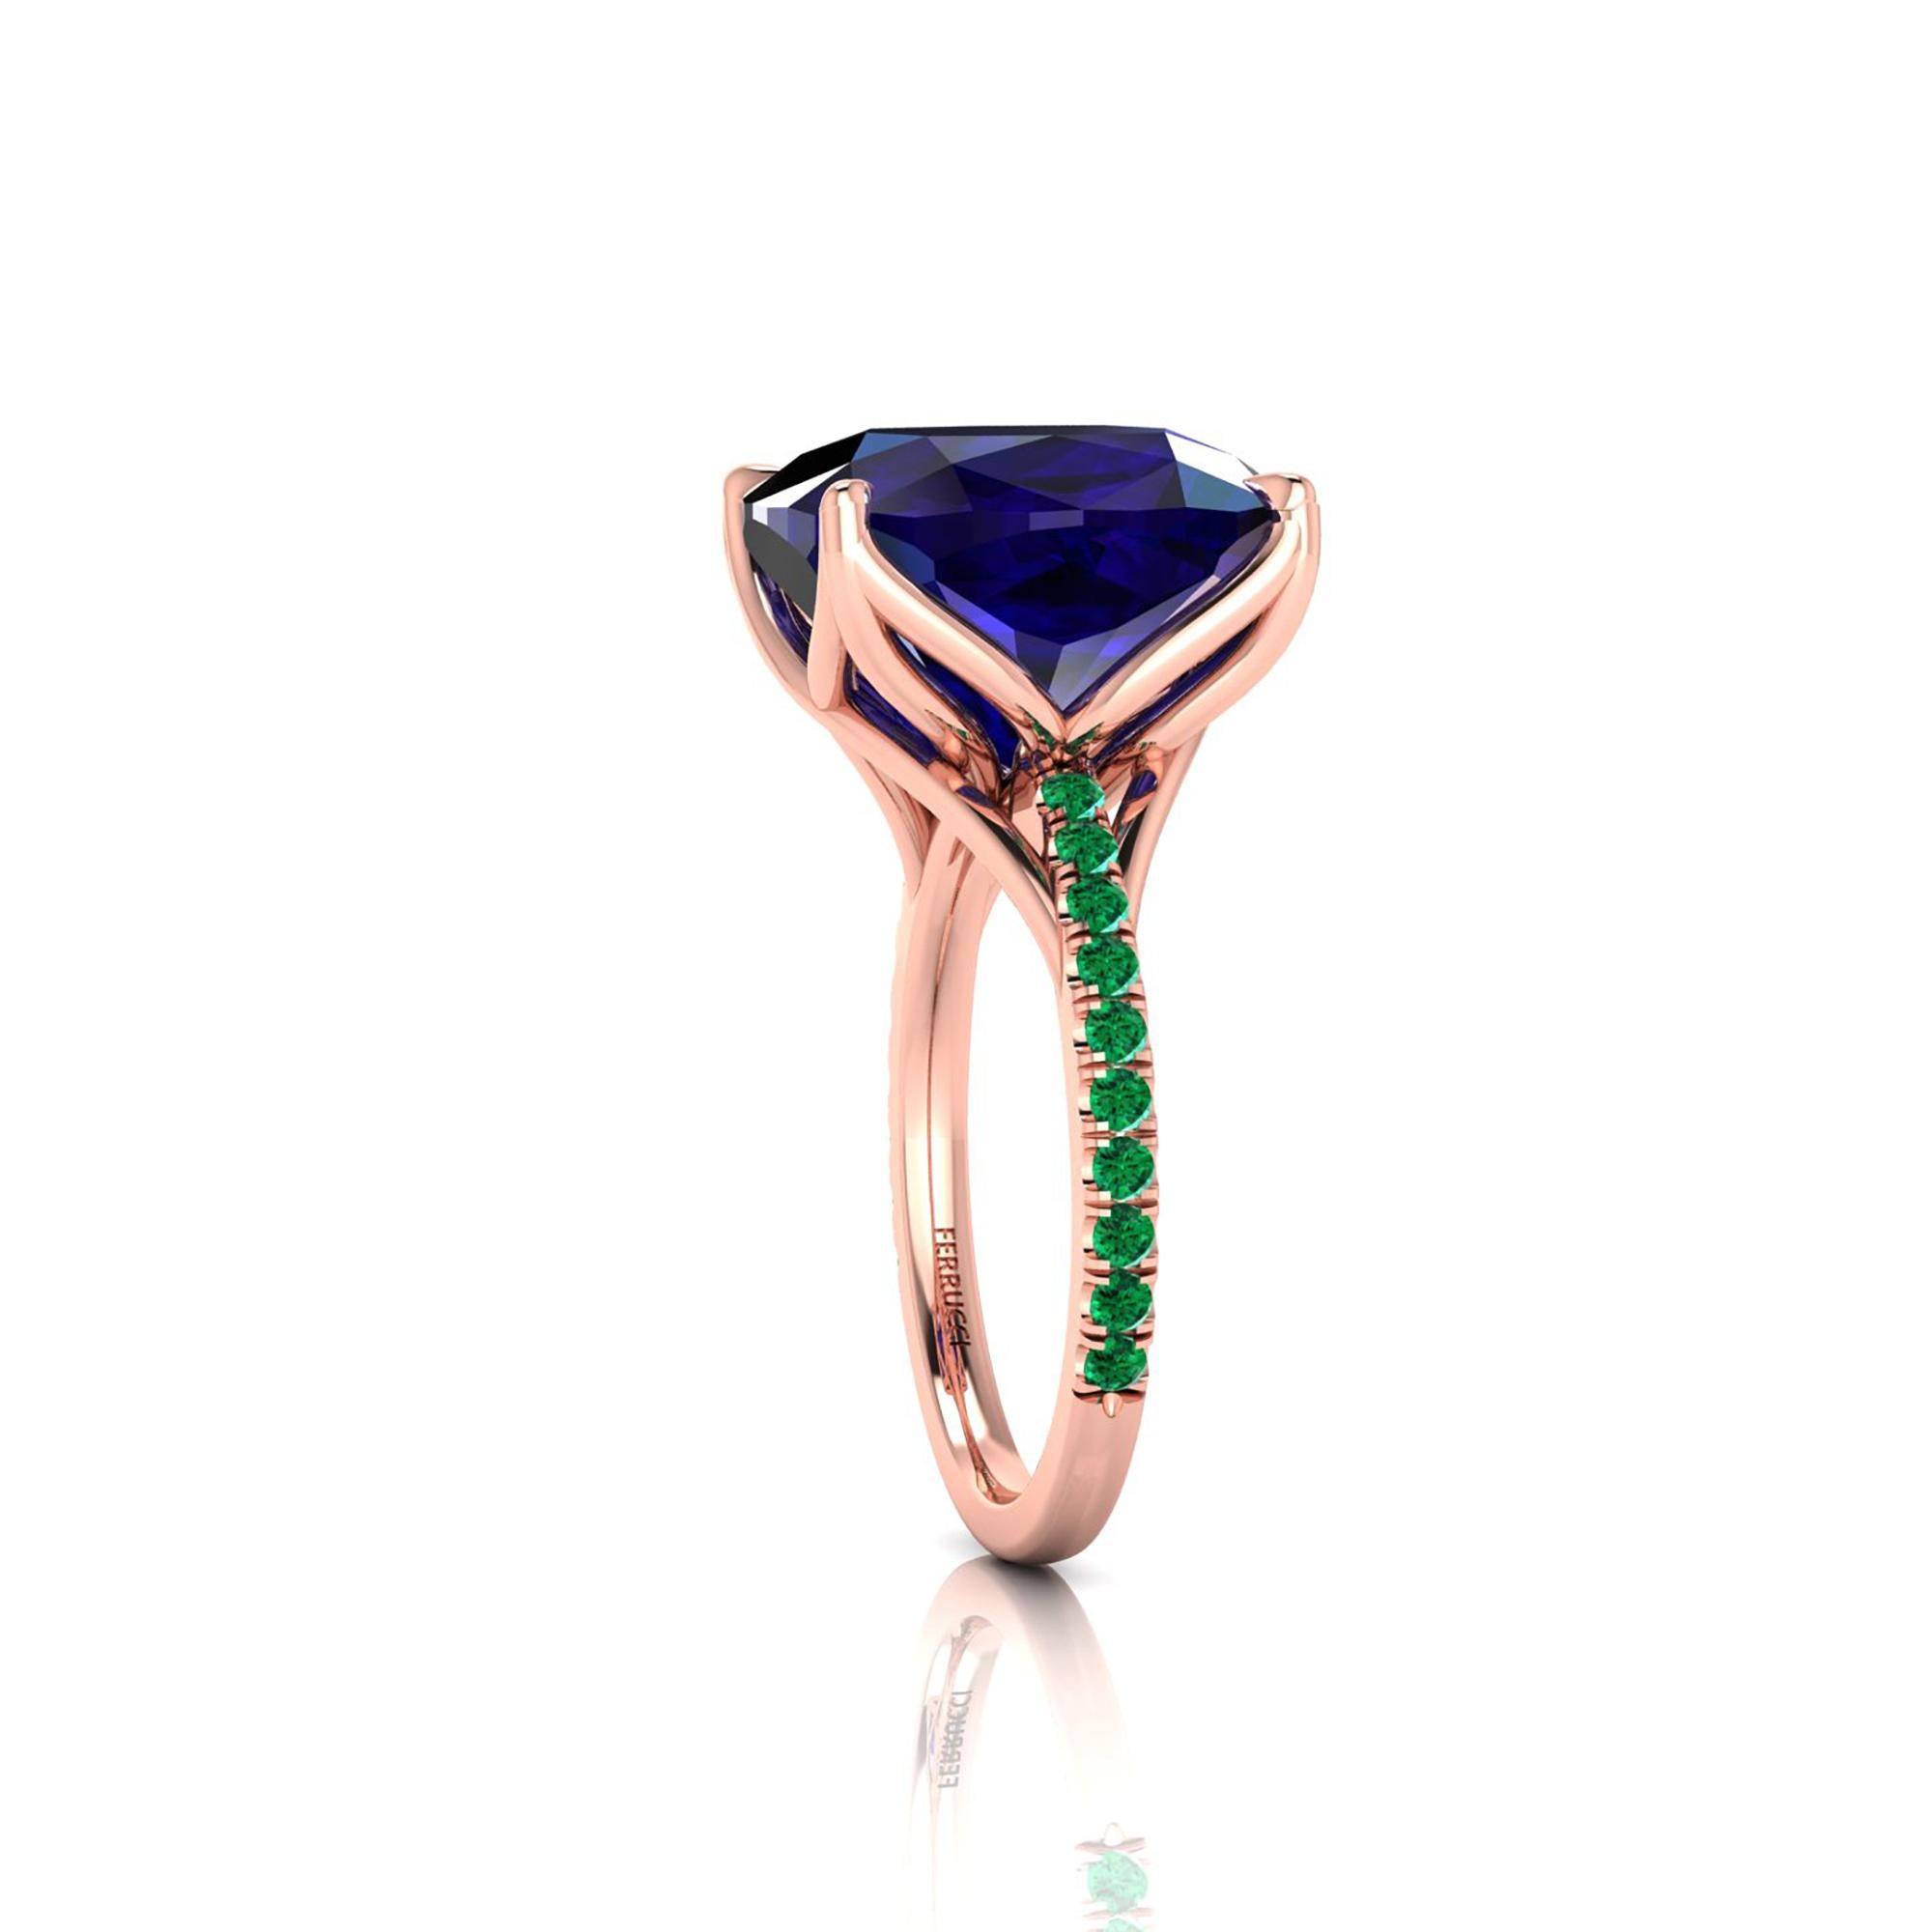 A Spectacular 9.61 carat natural Tanzanite of a deep blue and purple refraction, unique in its splendor, GIA Certified, with green Emerald pave' set on the shoulders of a one of a kind, hand made 18k rose gold ring, designed and conceived in New